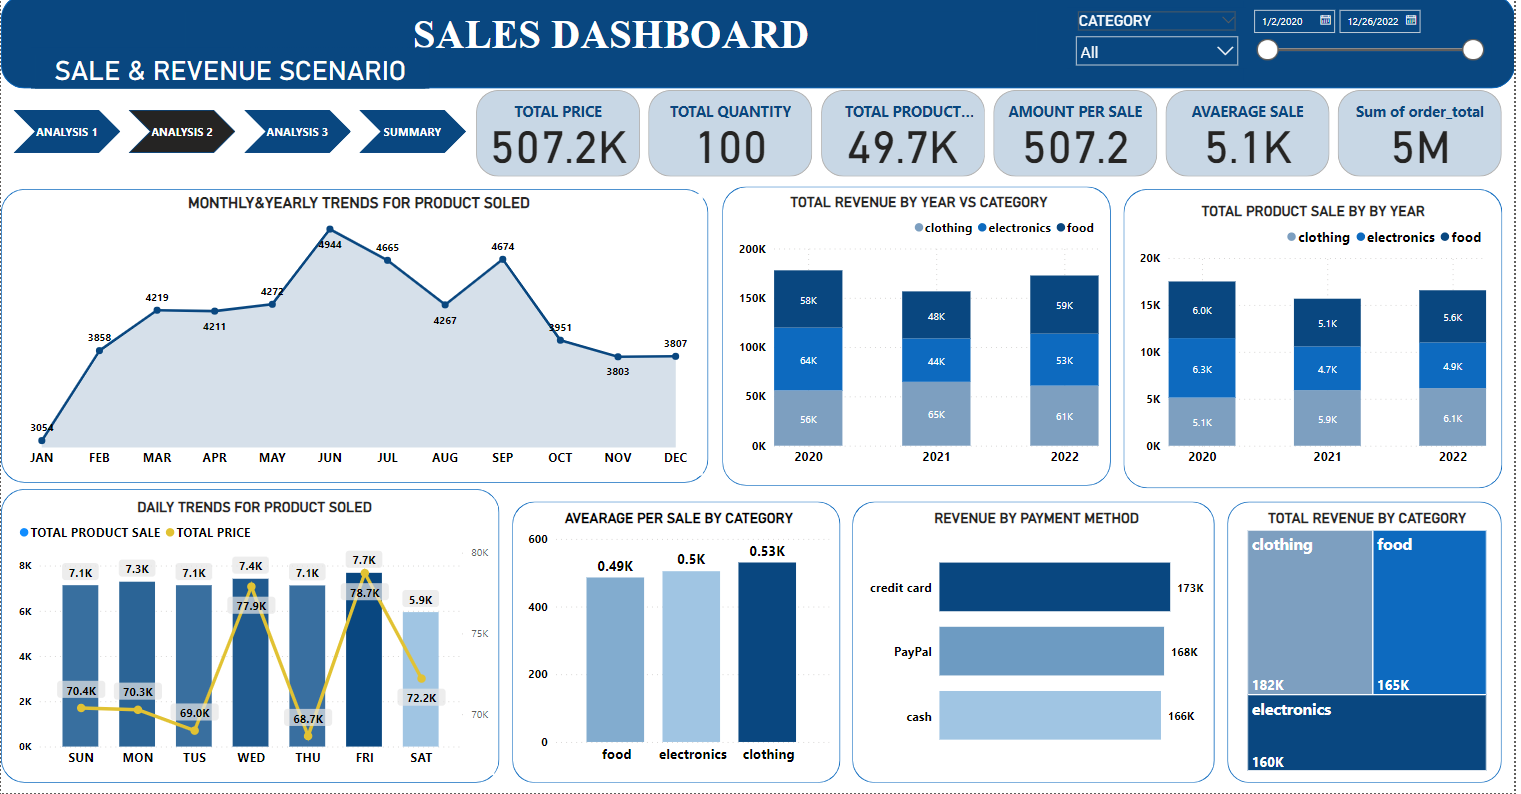 SALES DASHBOARD CATEGORY

AR

SALE &amp; REVENUE SCENARIO
TOTAL PRICE TOTAL QUANTITY TOTAL PRODUCT AMOUNT PER SALE AVAERAGE SALE ‘Sum of order total
DIDDY 5072K 100 497K 5072 5.1K 5M
MONTHLYAYEARLY TRENDS FOR PRODUCT SOLED TOTAL REVENUE BY YEAR VS CATEGORY

© ciothing @ rirctionxs ®lood

 

TOTAL PRODUCT SALE BY BY YEAR

© clothing ® electronics ®100d

 

 

room
rox
nox -
rox rox
pe
sox ww
p
ox o
AN BB MAR APR MAY UN IL AUG SEP OCT NOV DRC 020 2071 000 020 2071 2000
DAILY TRENDS FOR PRODUCT SOLED
AVEARAGE PER SALE BY CATEGORY REVENUE BY PAYMENT METHOD TOTAL REVENUE BY CATEGORY
TOTAL PRODIX T SALE © TOTAL PRICE wo
053K
1 05K
“ = gm U8 g 049%
1 1 w maw
7x. edit cae en
w I ~ 00
“ ~~
oe
rox
" li Ww 1m
-—
aE - -

 

 

MON Tus WID Tau BRI SAT food electrons clothing